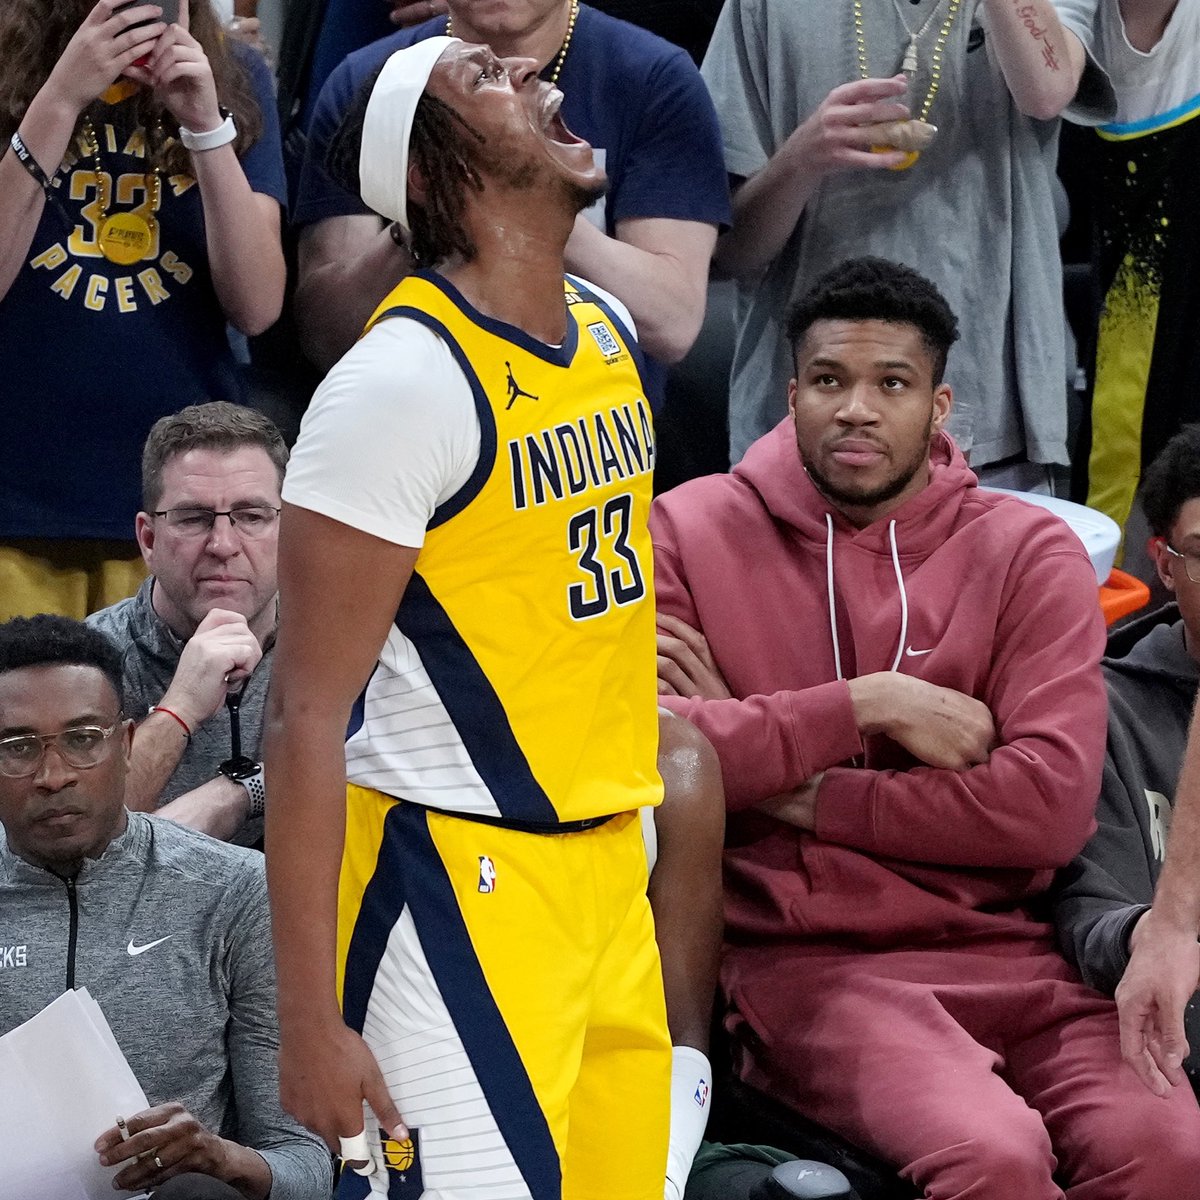 Through 4 games, Myles Turner is averaging: 24.3 PPG 61.9 TS% 50.0 3P%—8.5 3PA/g 8.3 RPG 3.3 APG—0.3 TOV 2.3 STL + BLK Turner was the 6th most efficient half-court player by points per possession this season on 15.5 poss/g. Efficiency translating to the playoffs in a big way!!